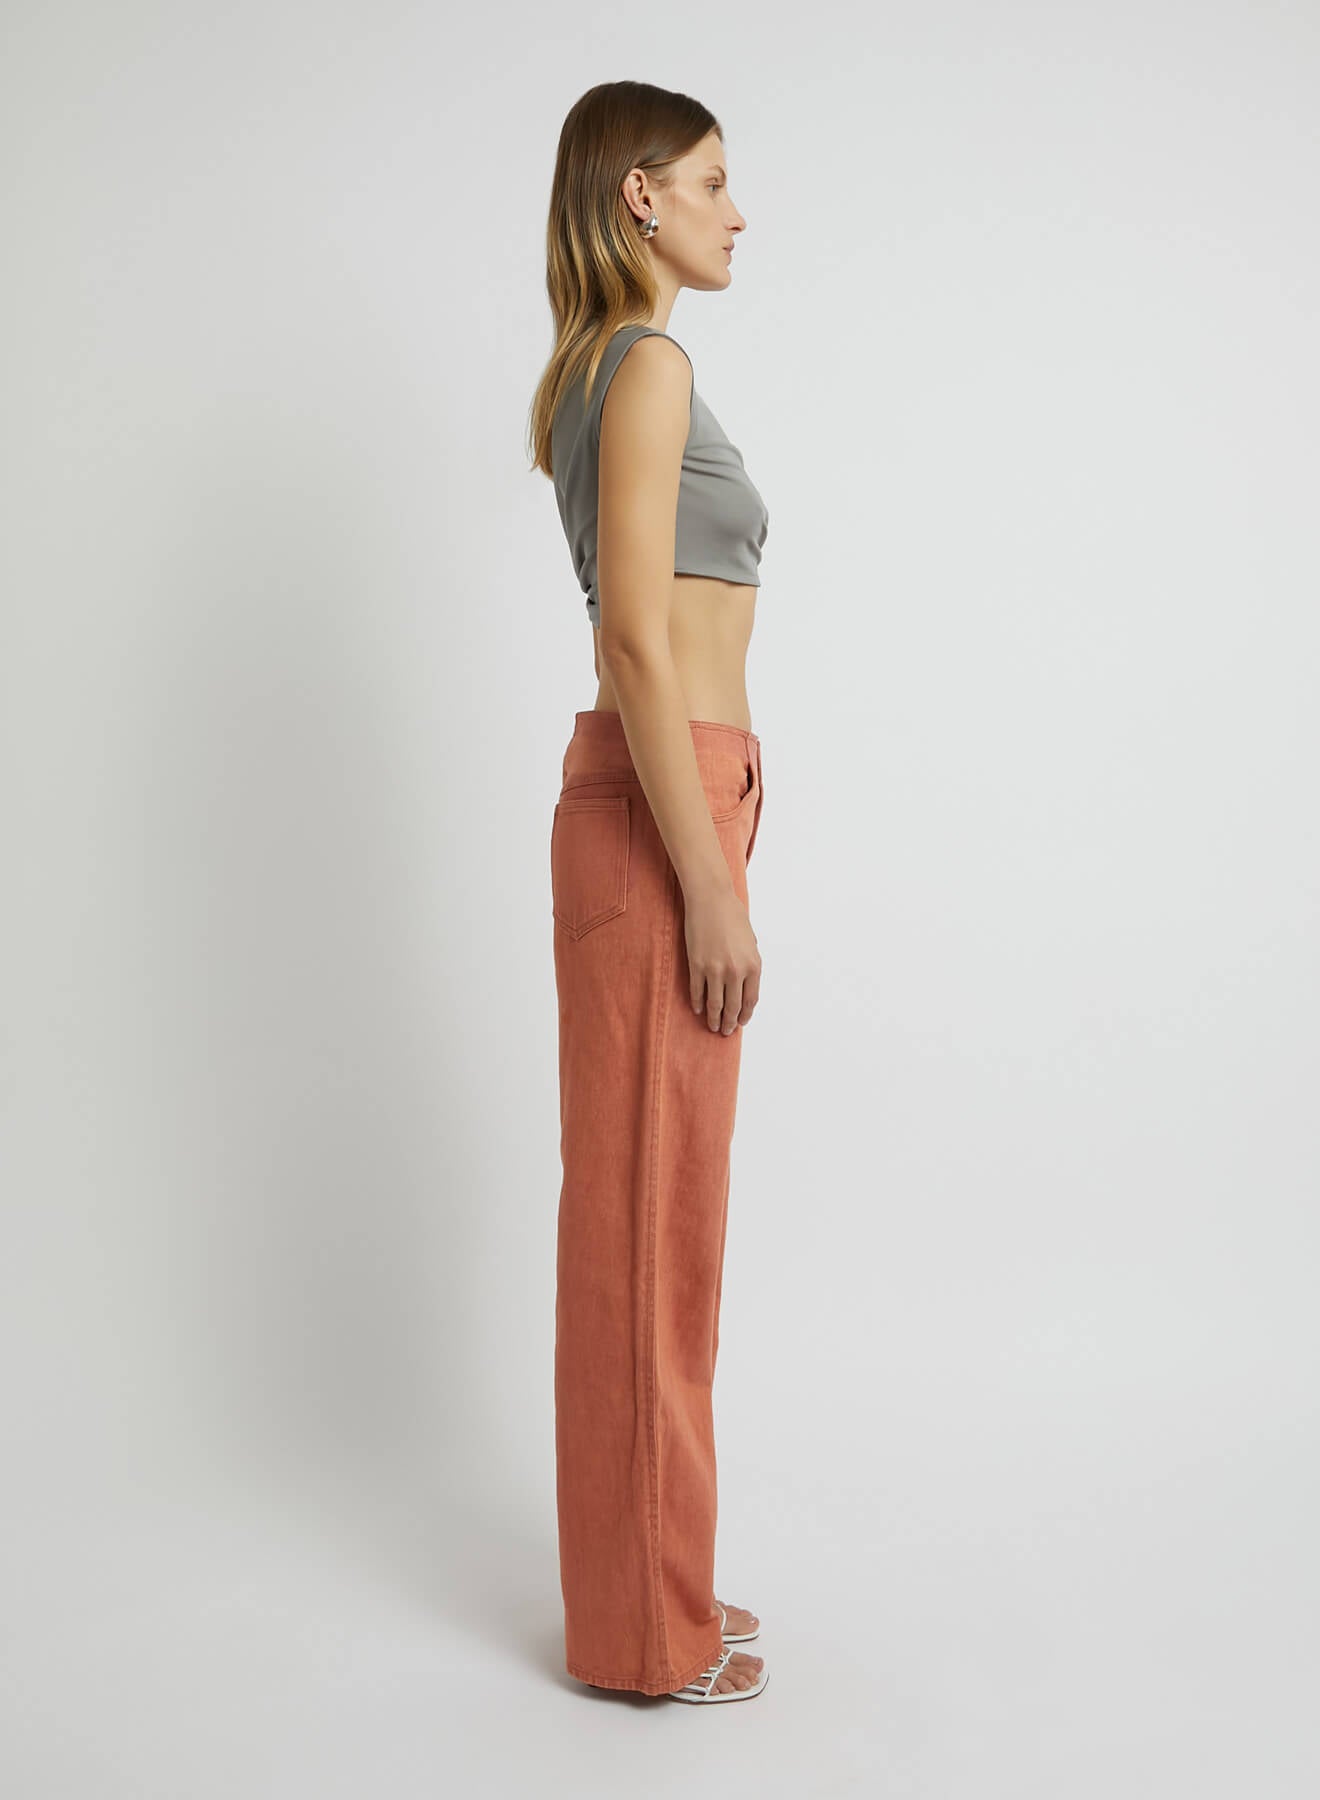 Christopher Esber Gesine Twisted Crop in Concrete available at The New Trend